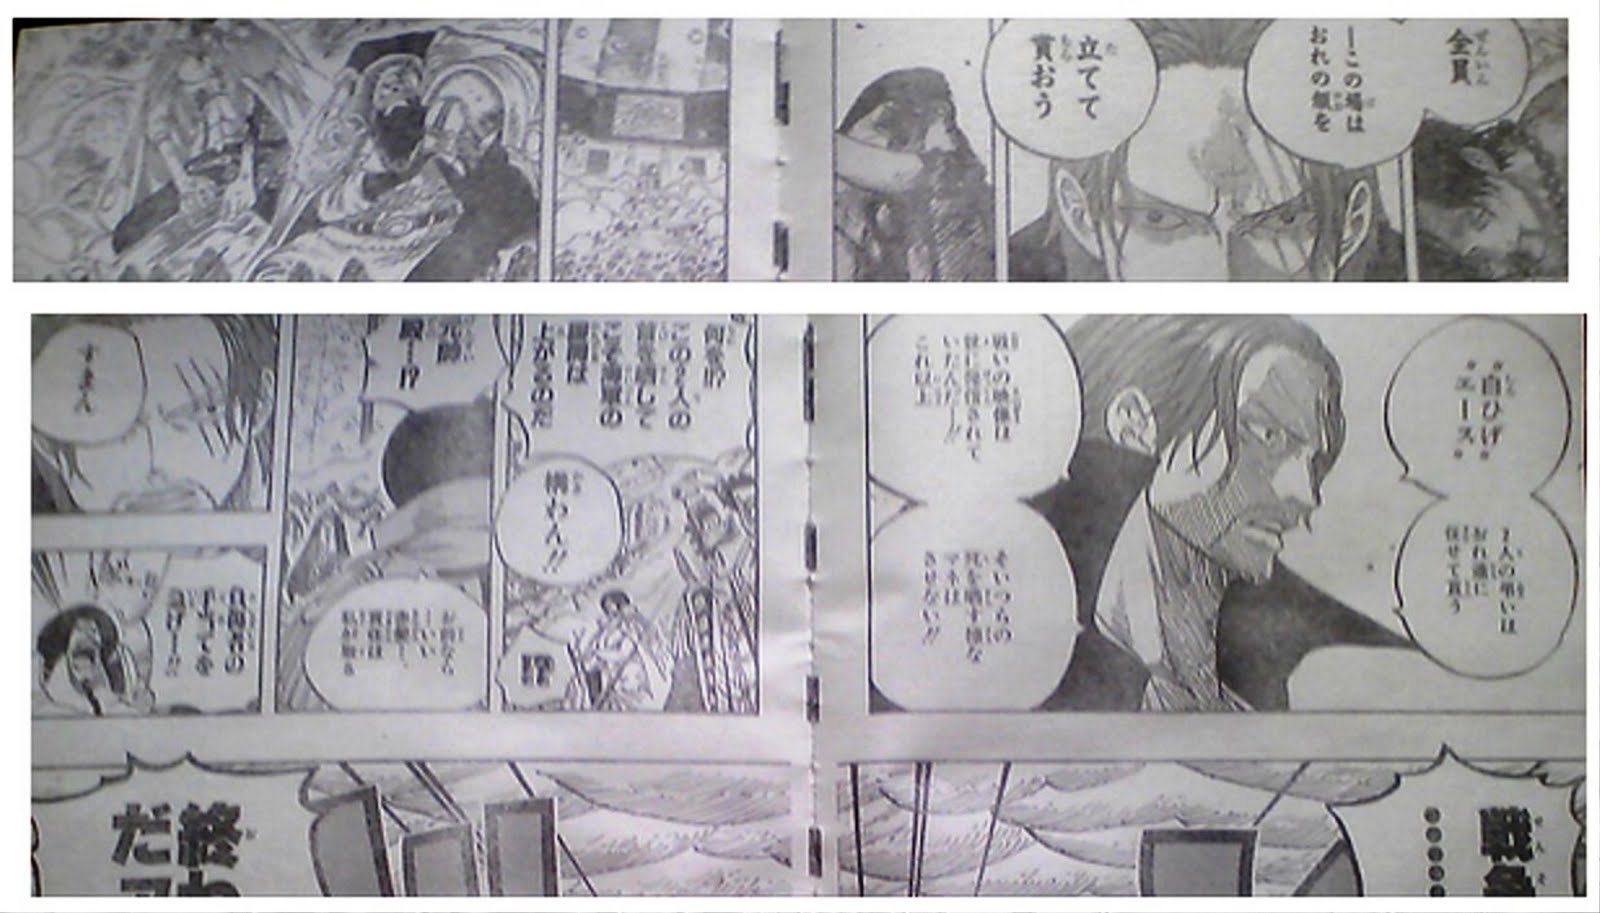 One Piece 580 spoilers and discussion 14-15+OP+580+spoiler